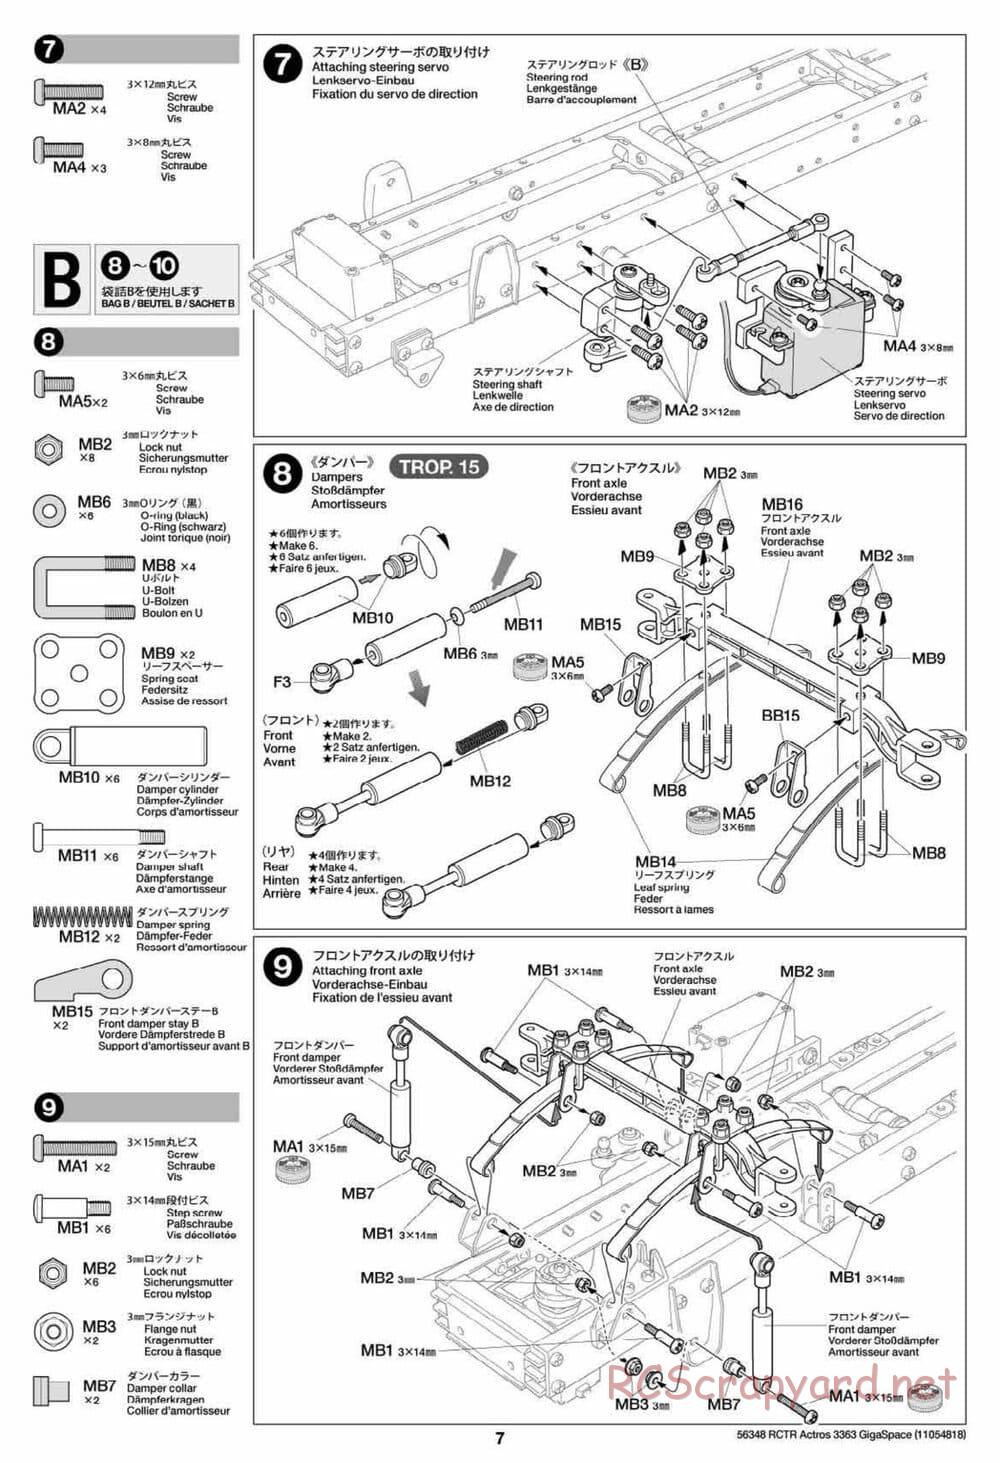 Tamiya - Mercedes-Benz Actros 3363 6x4 GigaSpace Tractor Truck Chassis - Manual - Page 7